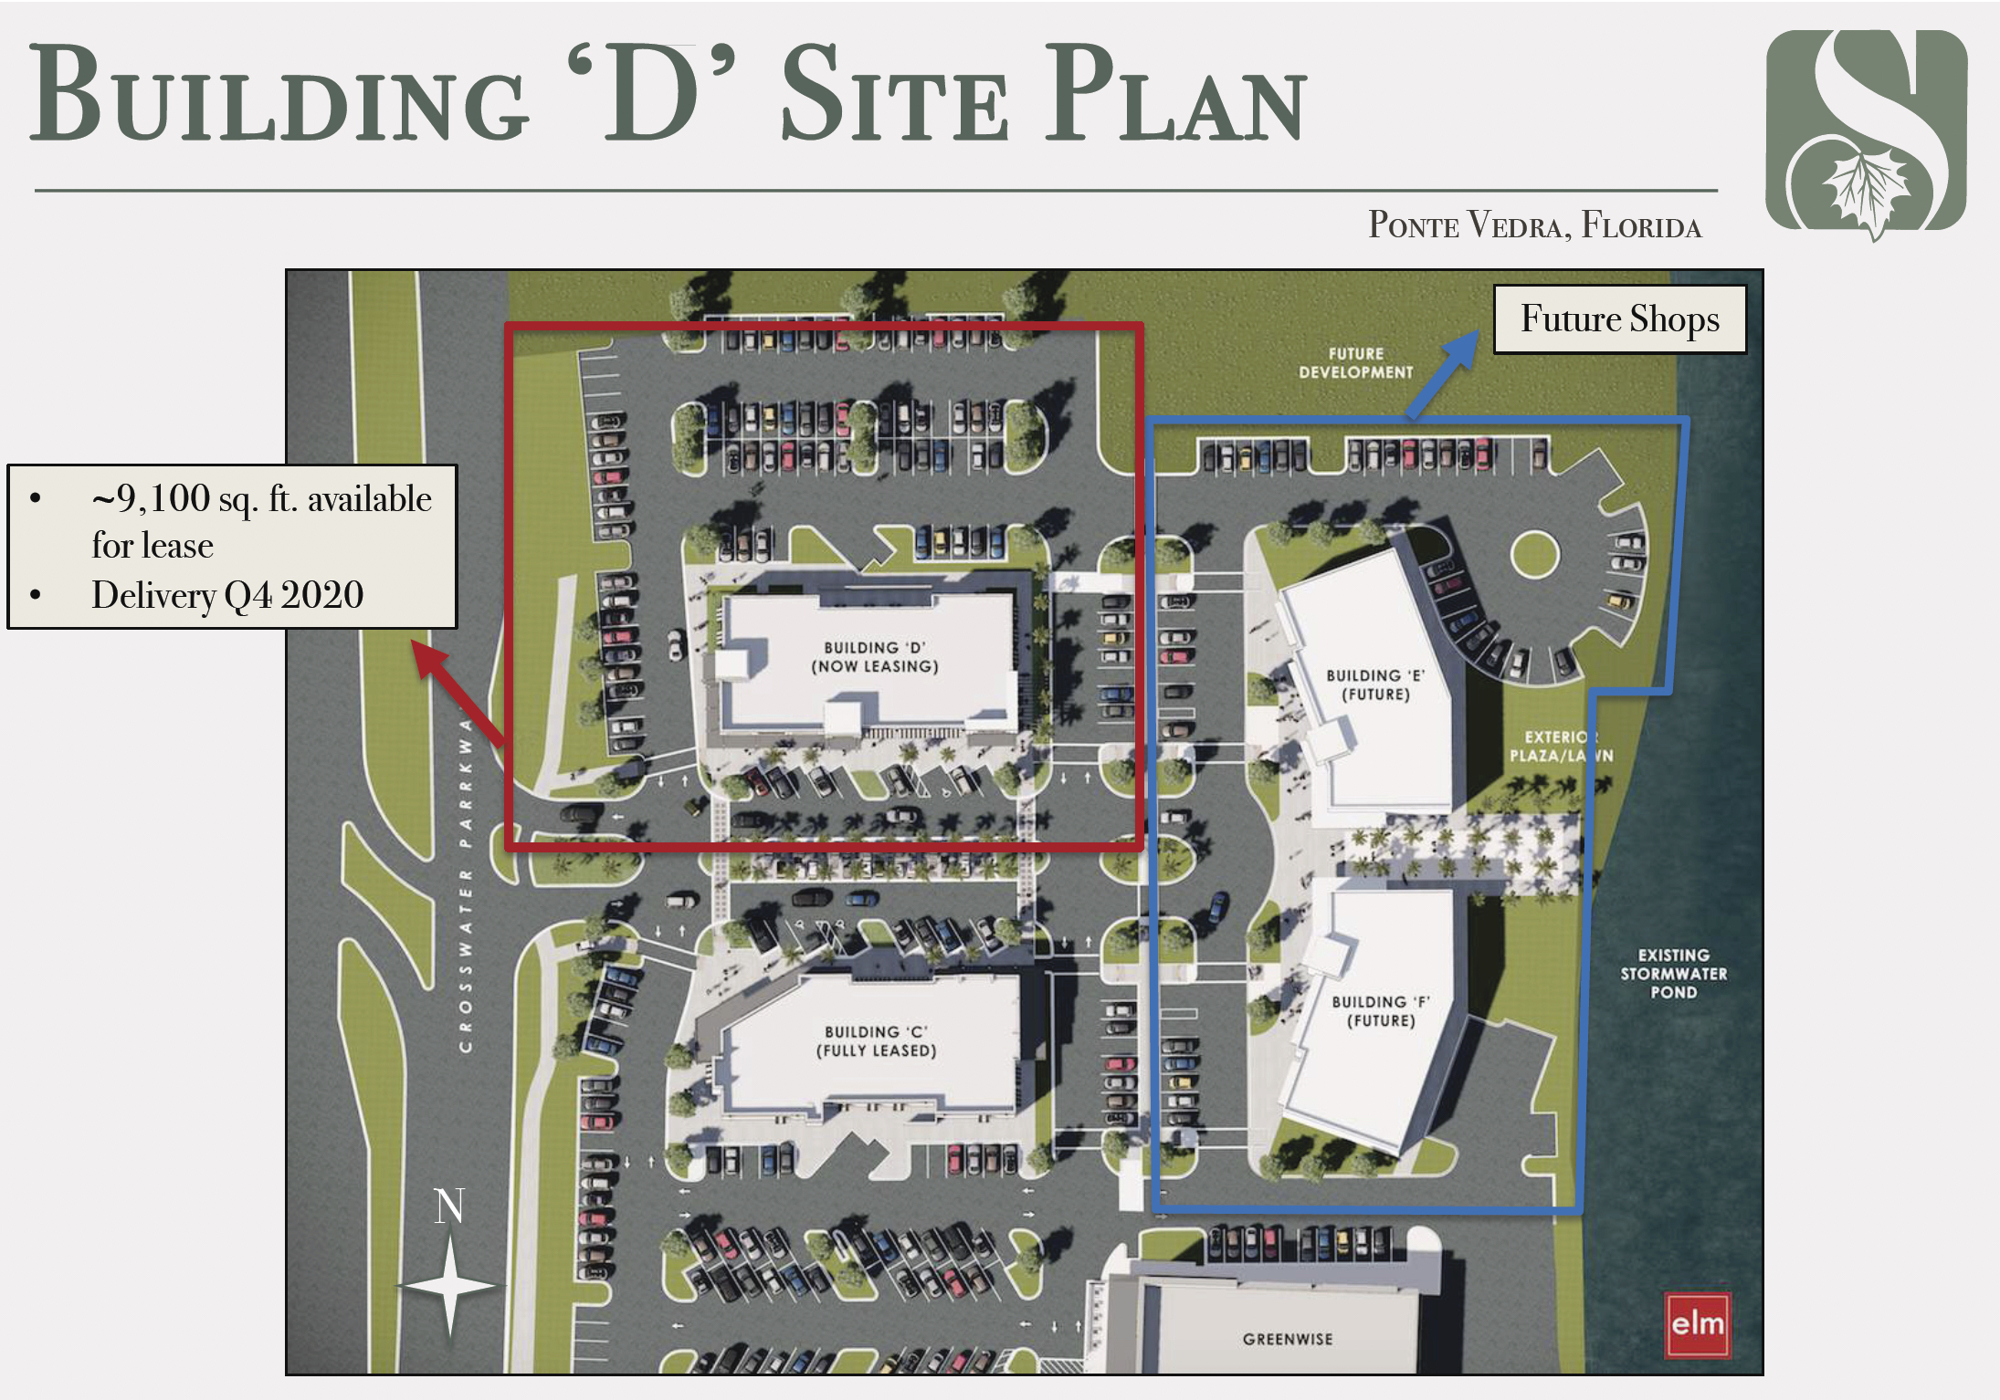 The site plan for Building D.